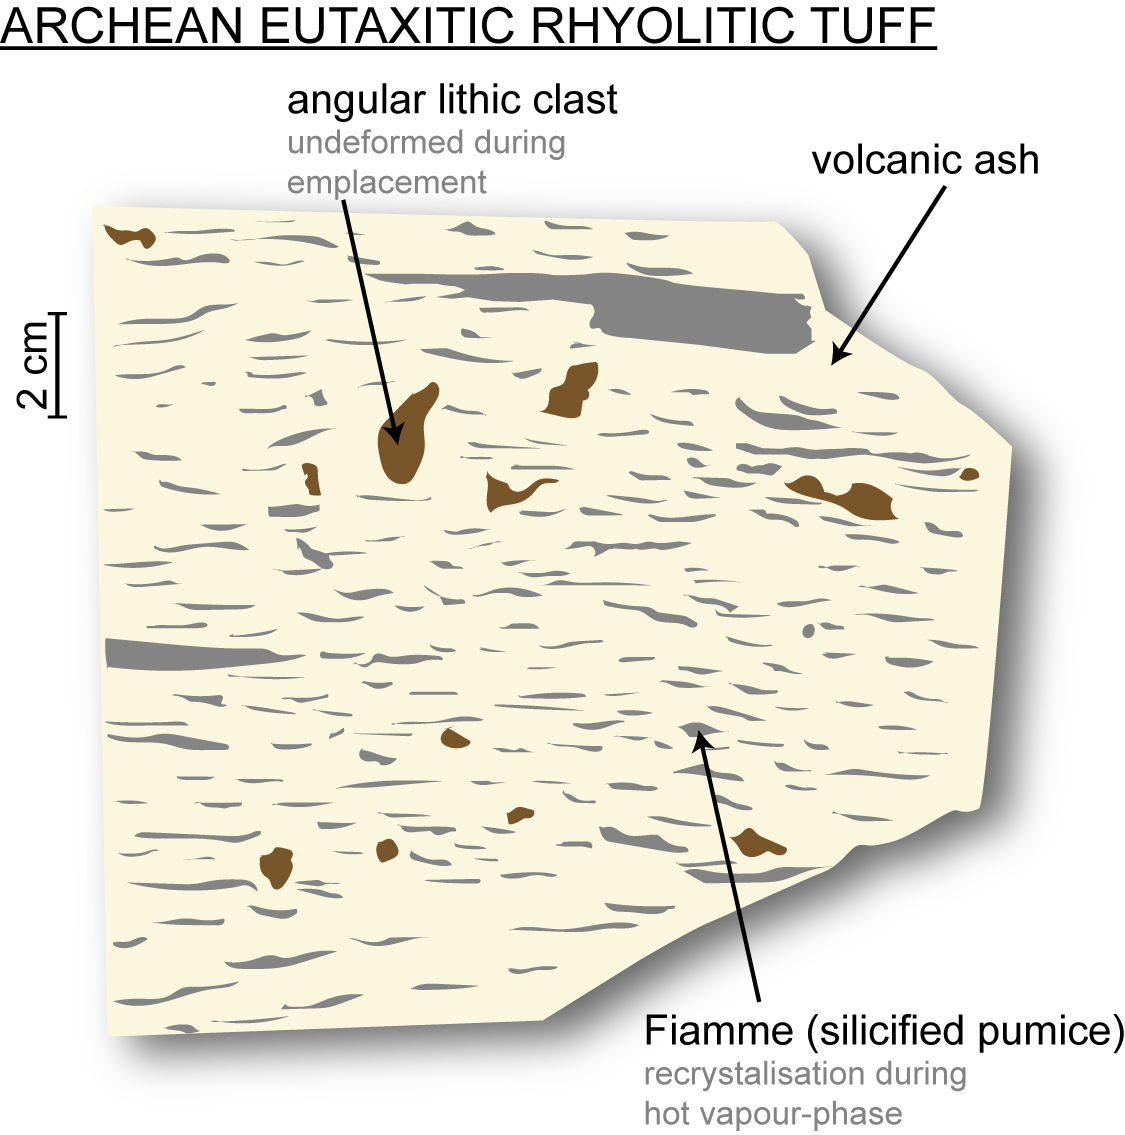 Archean felsic volcanic rock containing fiamme structure